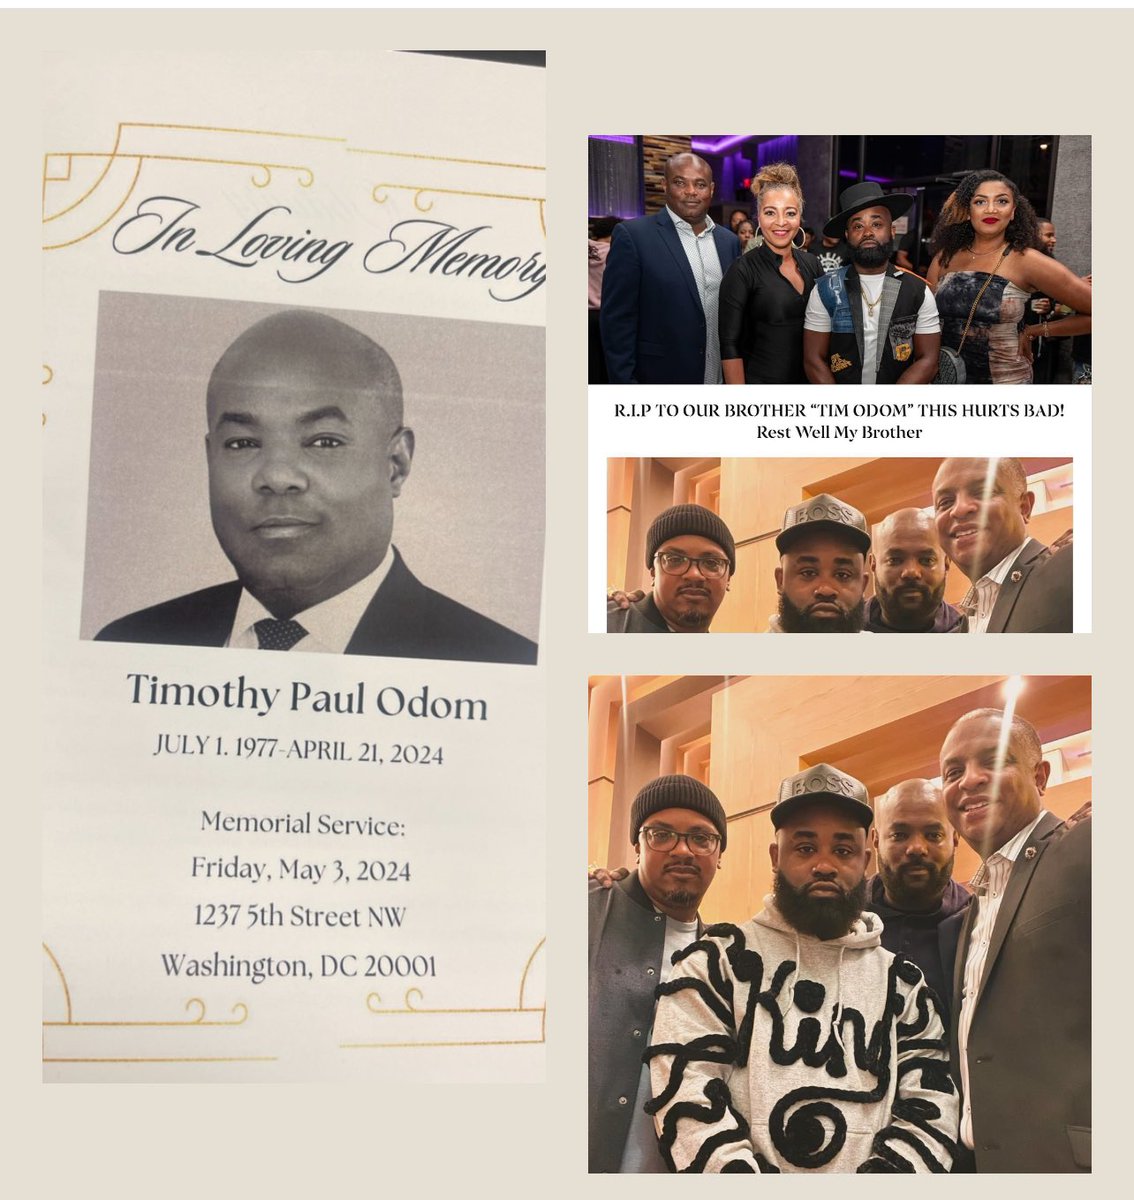 Dear Tim Odom- today started off rough for Me, Uncle Mark & Uncle Jimmy & our whole entire crew, family members loved ones because you impacted our lives so much! After listening to the brother speak about you & seeing how much everyone loved you I realized how much of a LEGEND…